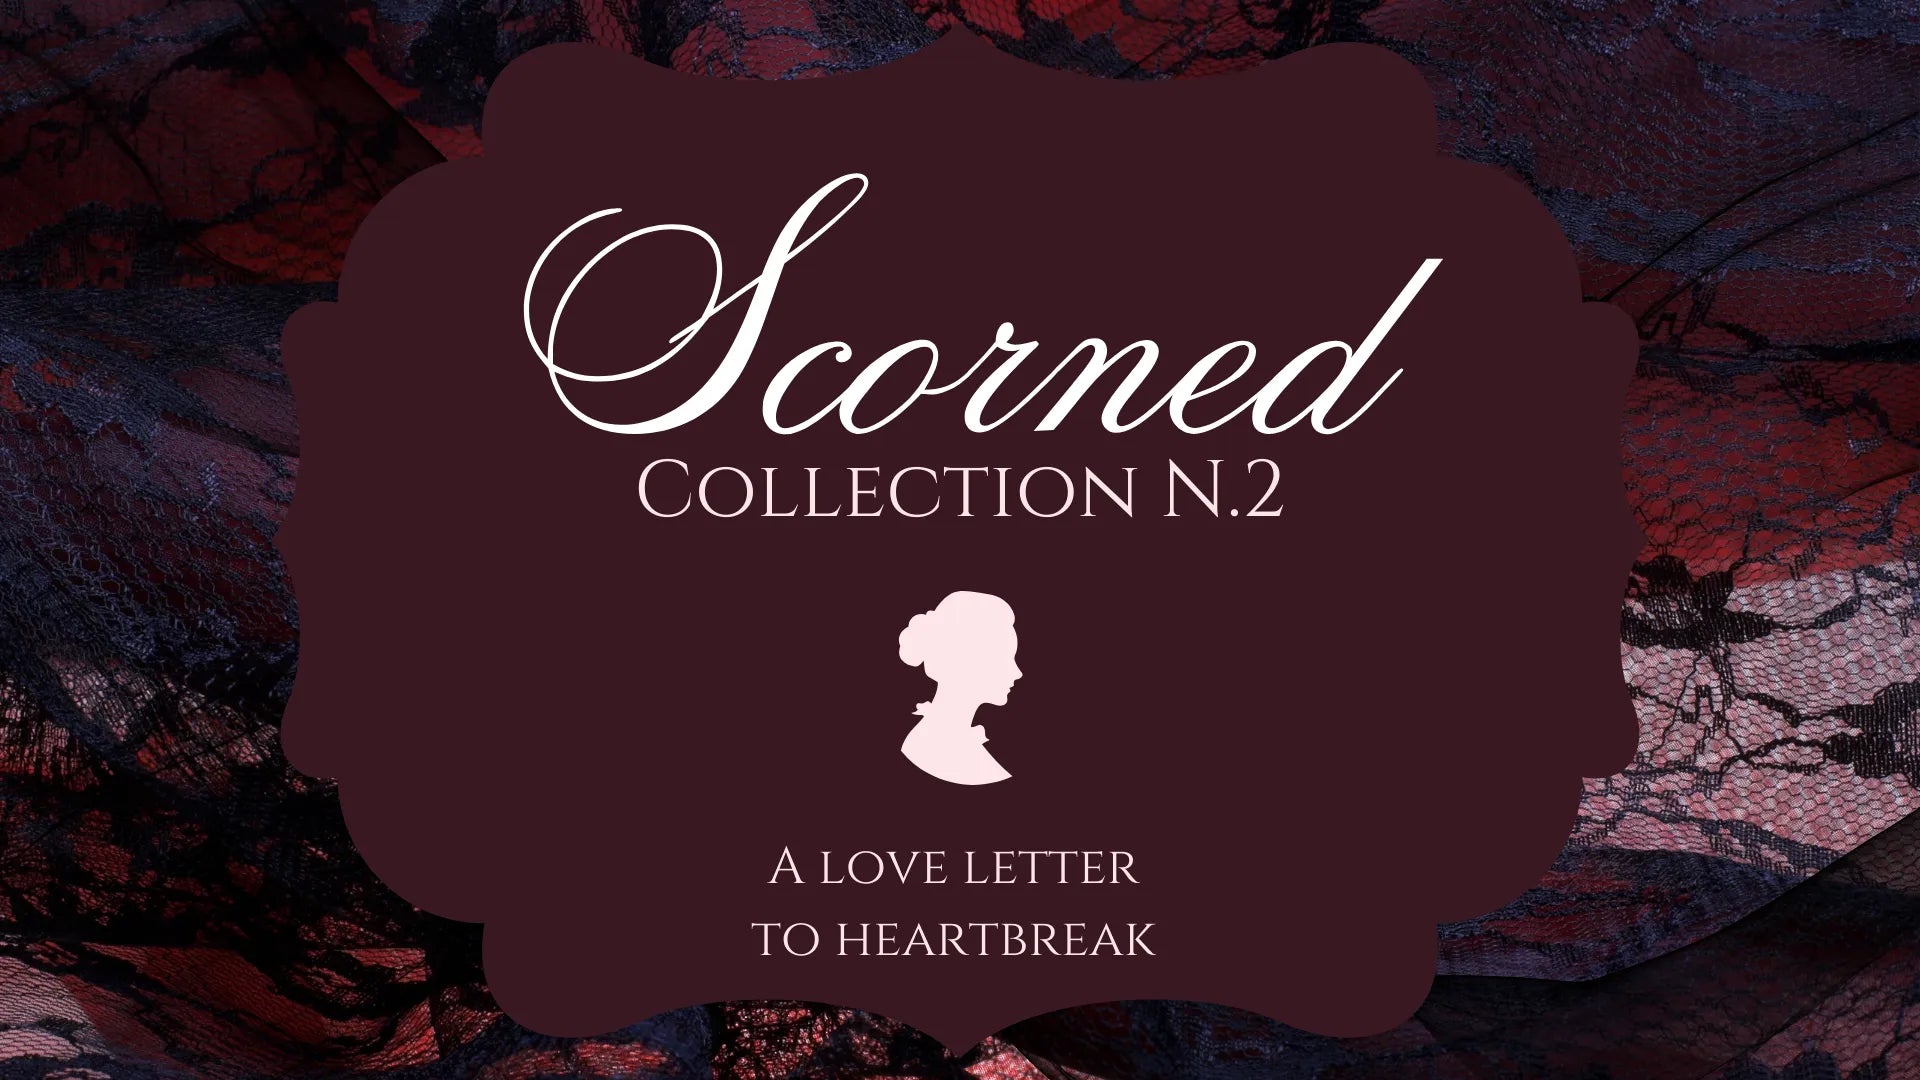 Scorned - Collection N.2: A Love Letter To Heartbreak - ${shop-name}